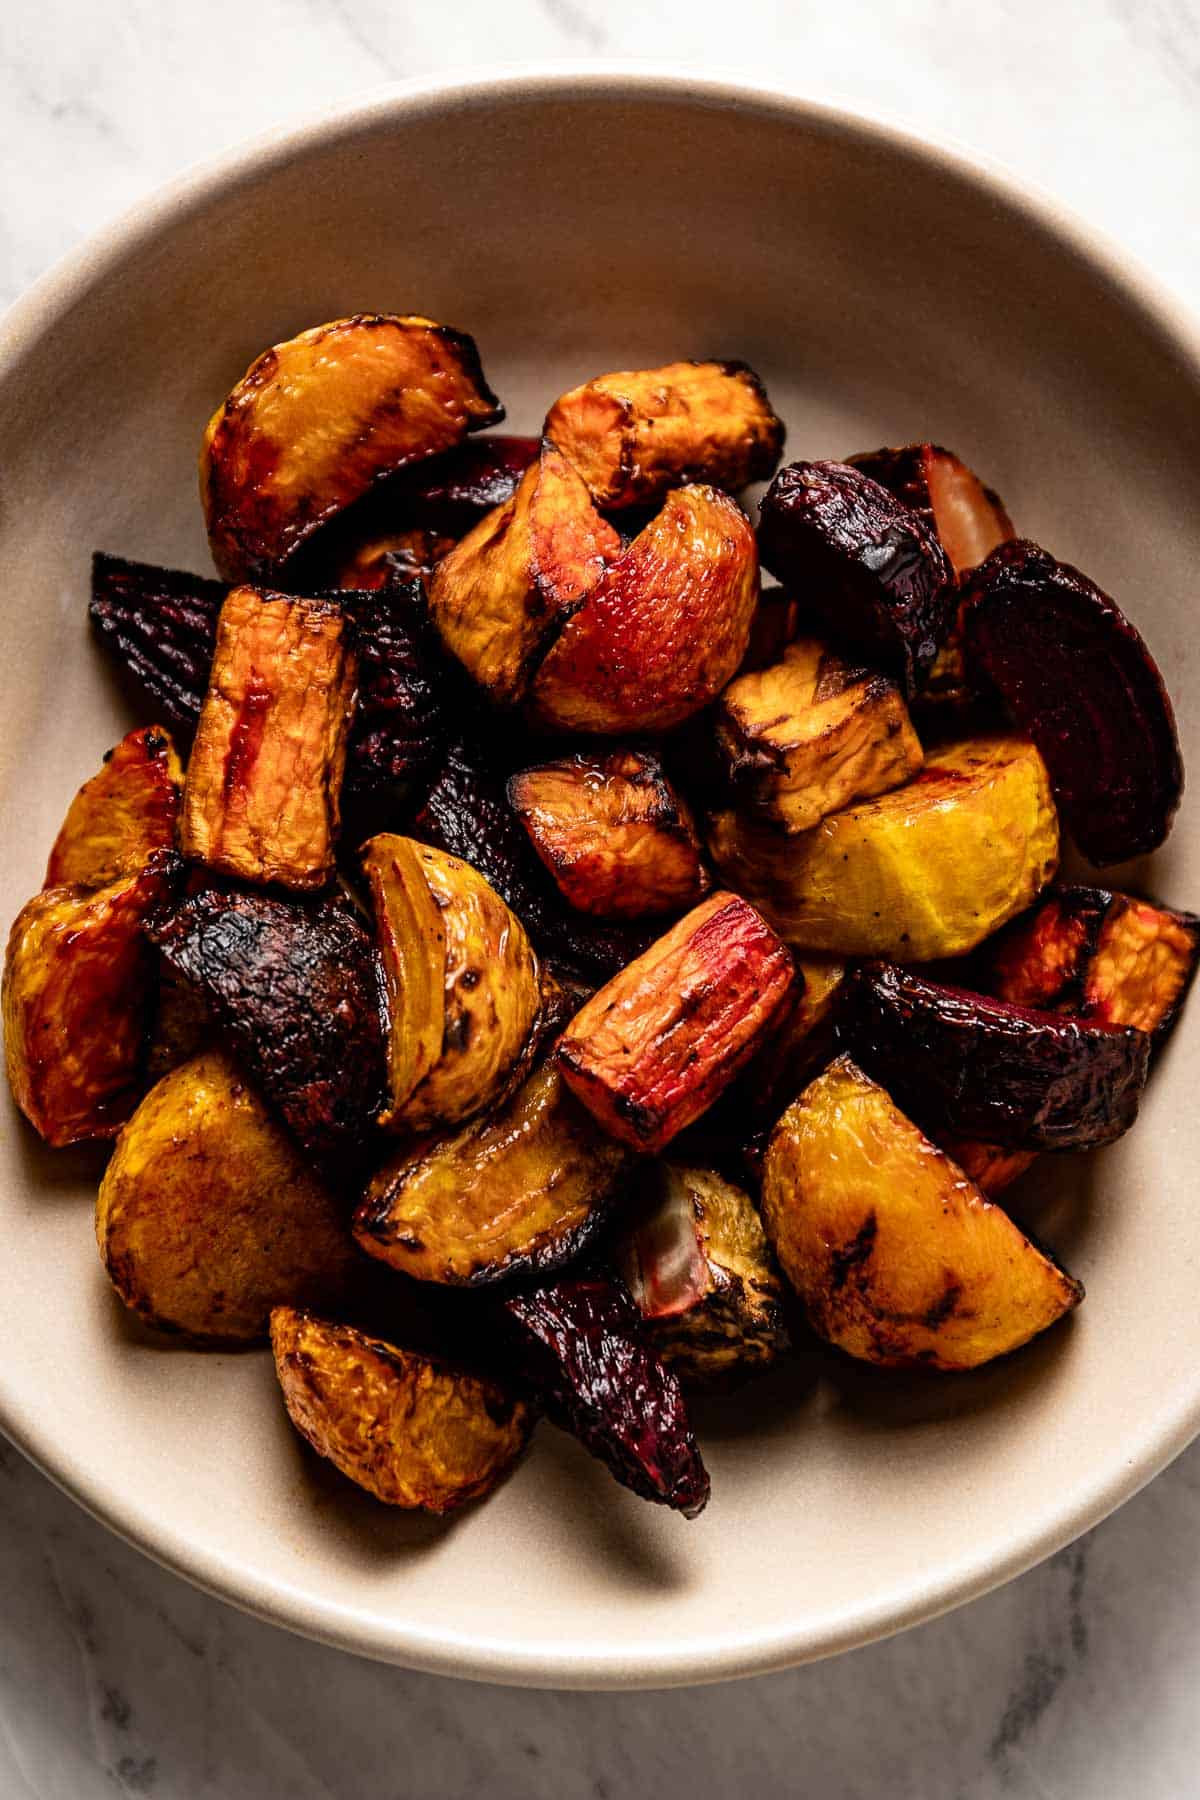 Air fryer beets and sweet potatoes in a bowl from the top view.